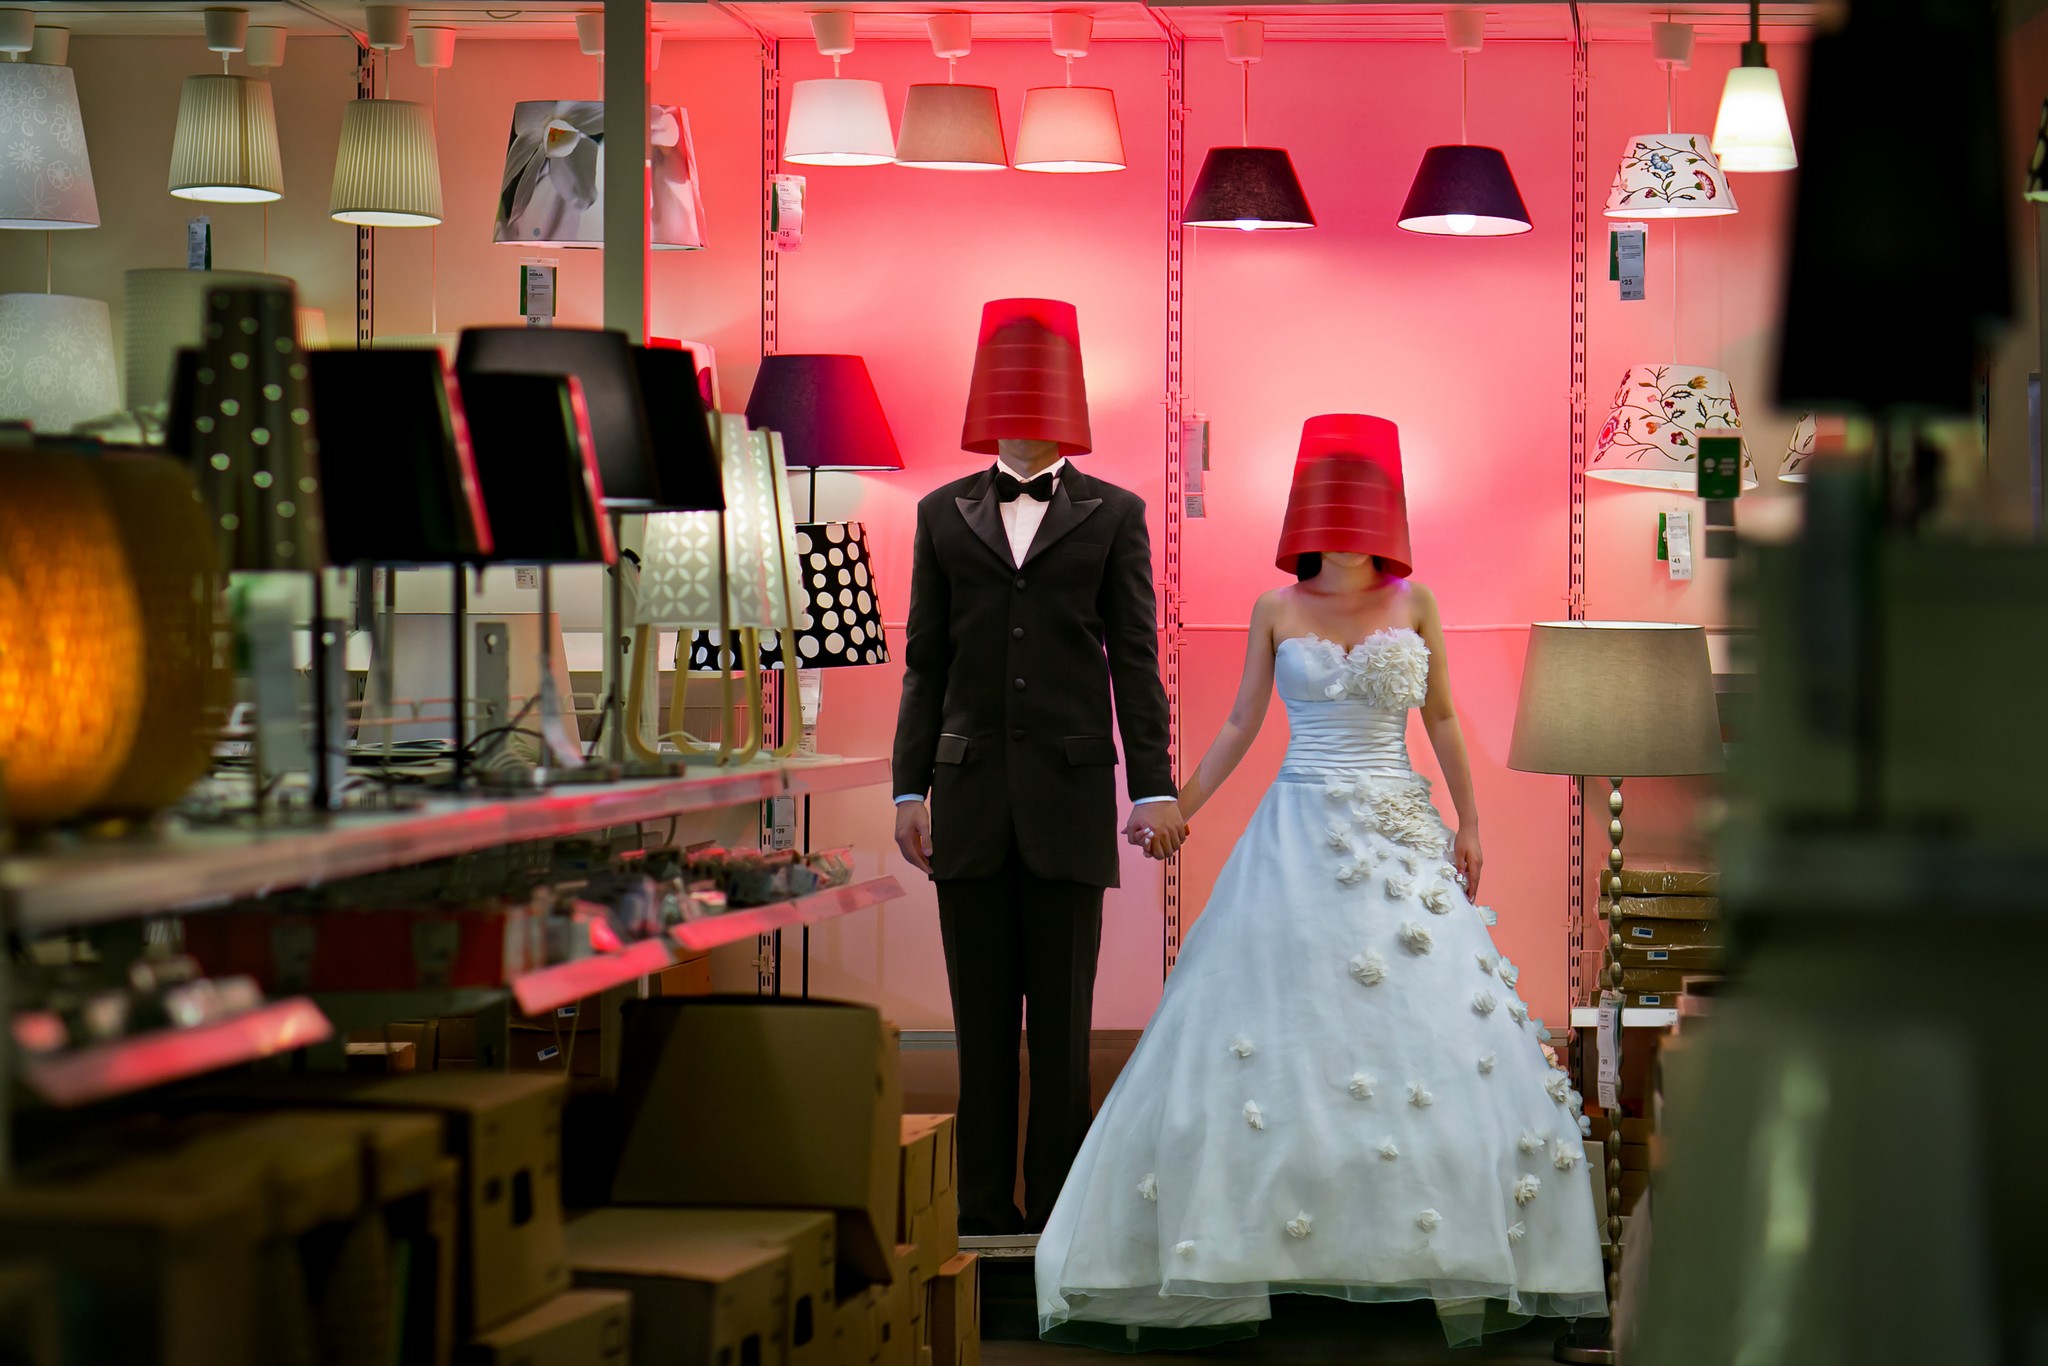 Creative photography by Raymond Phang featuring a couple in red hats inside a store.